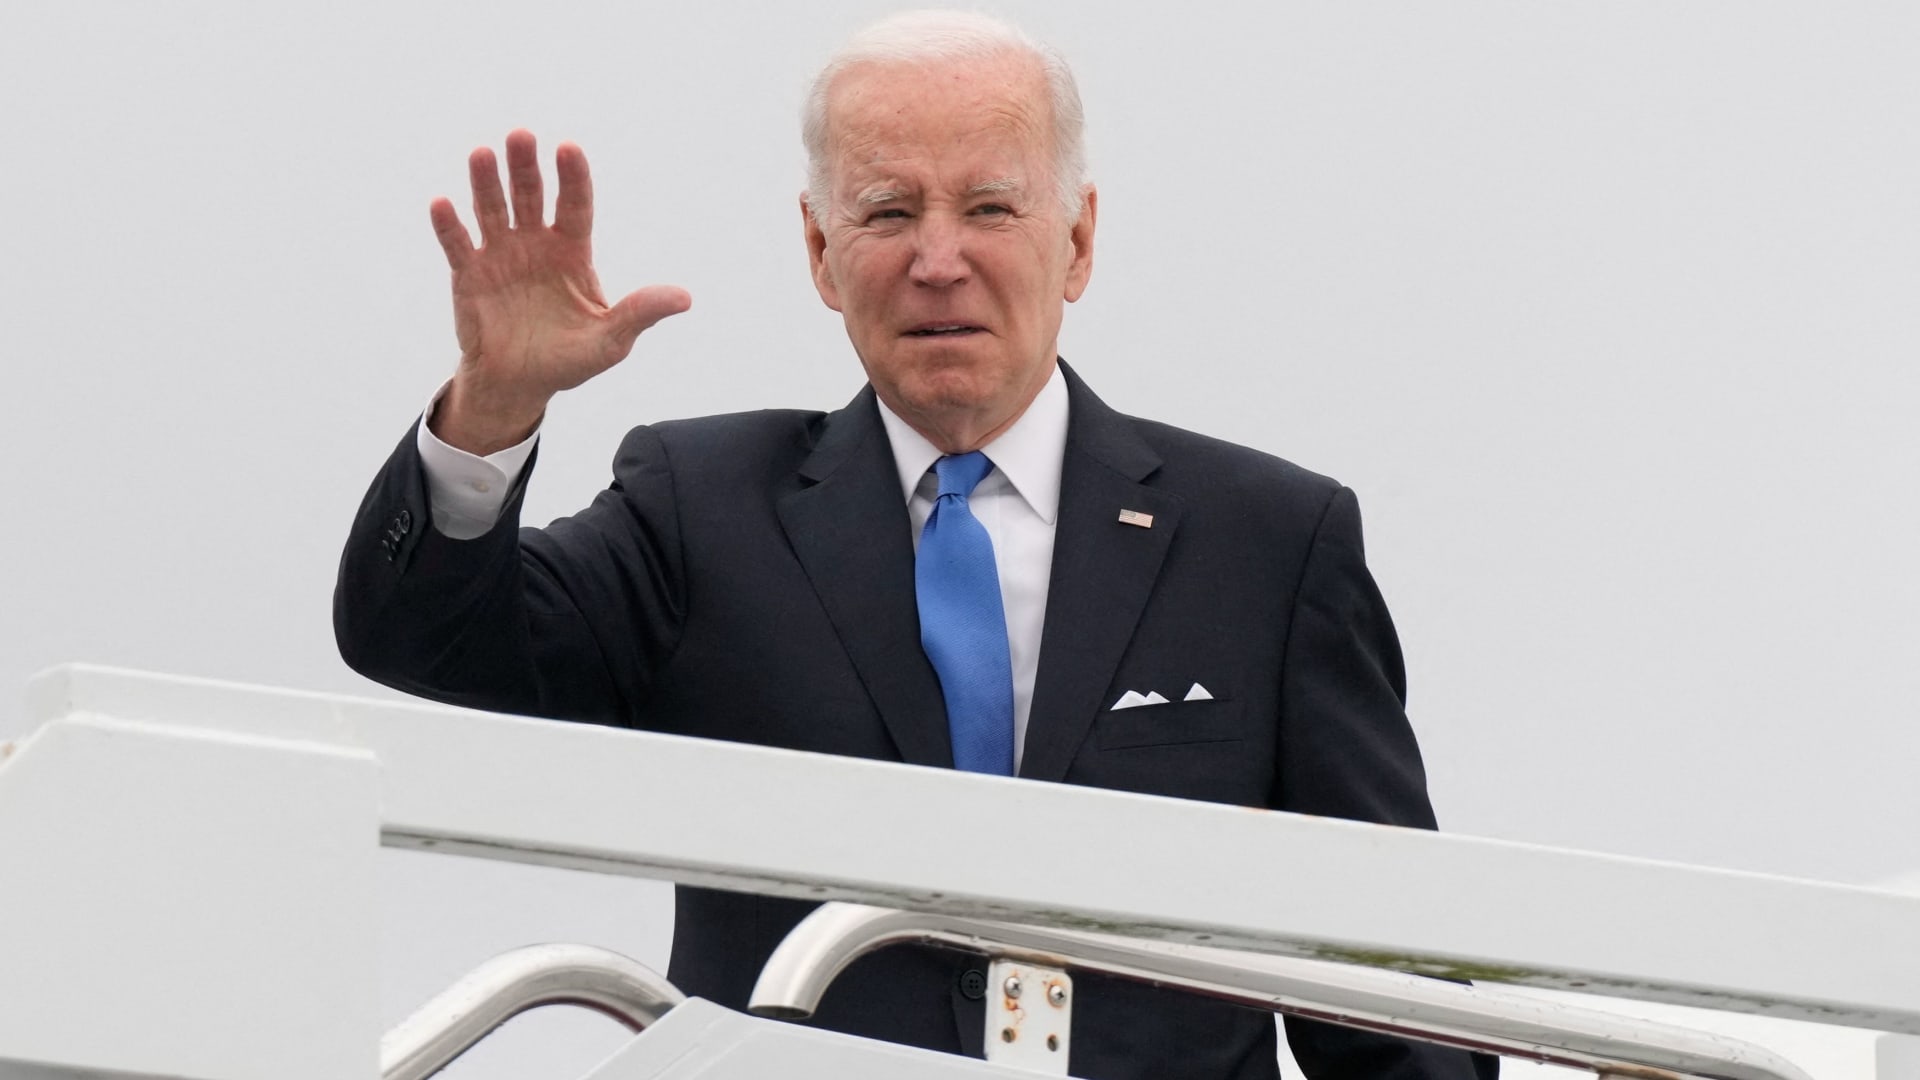 U.S. President Joe Biden waves as he boards Air Force One for return travel to Washington, at Dover Air Force Base in Dover, Delaware, January 23, 2023.